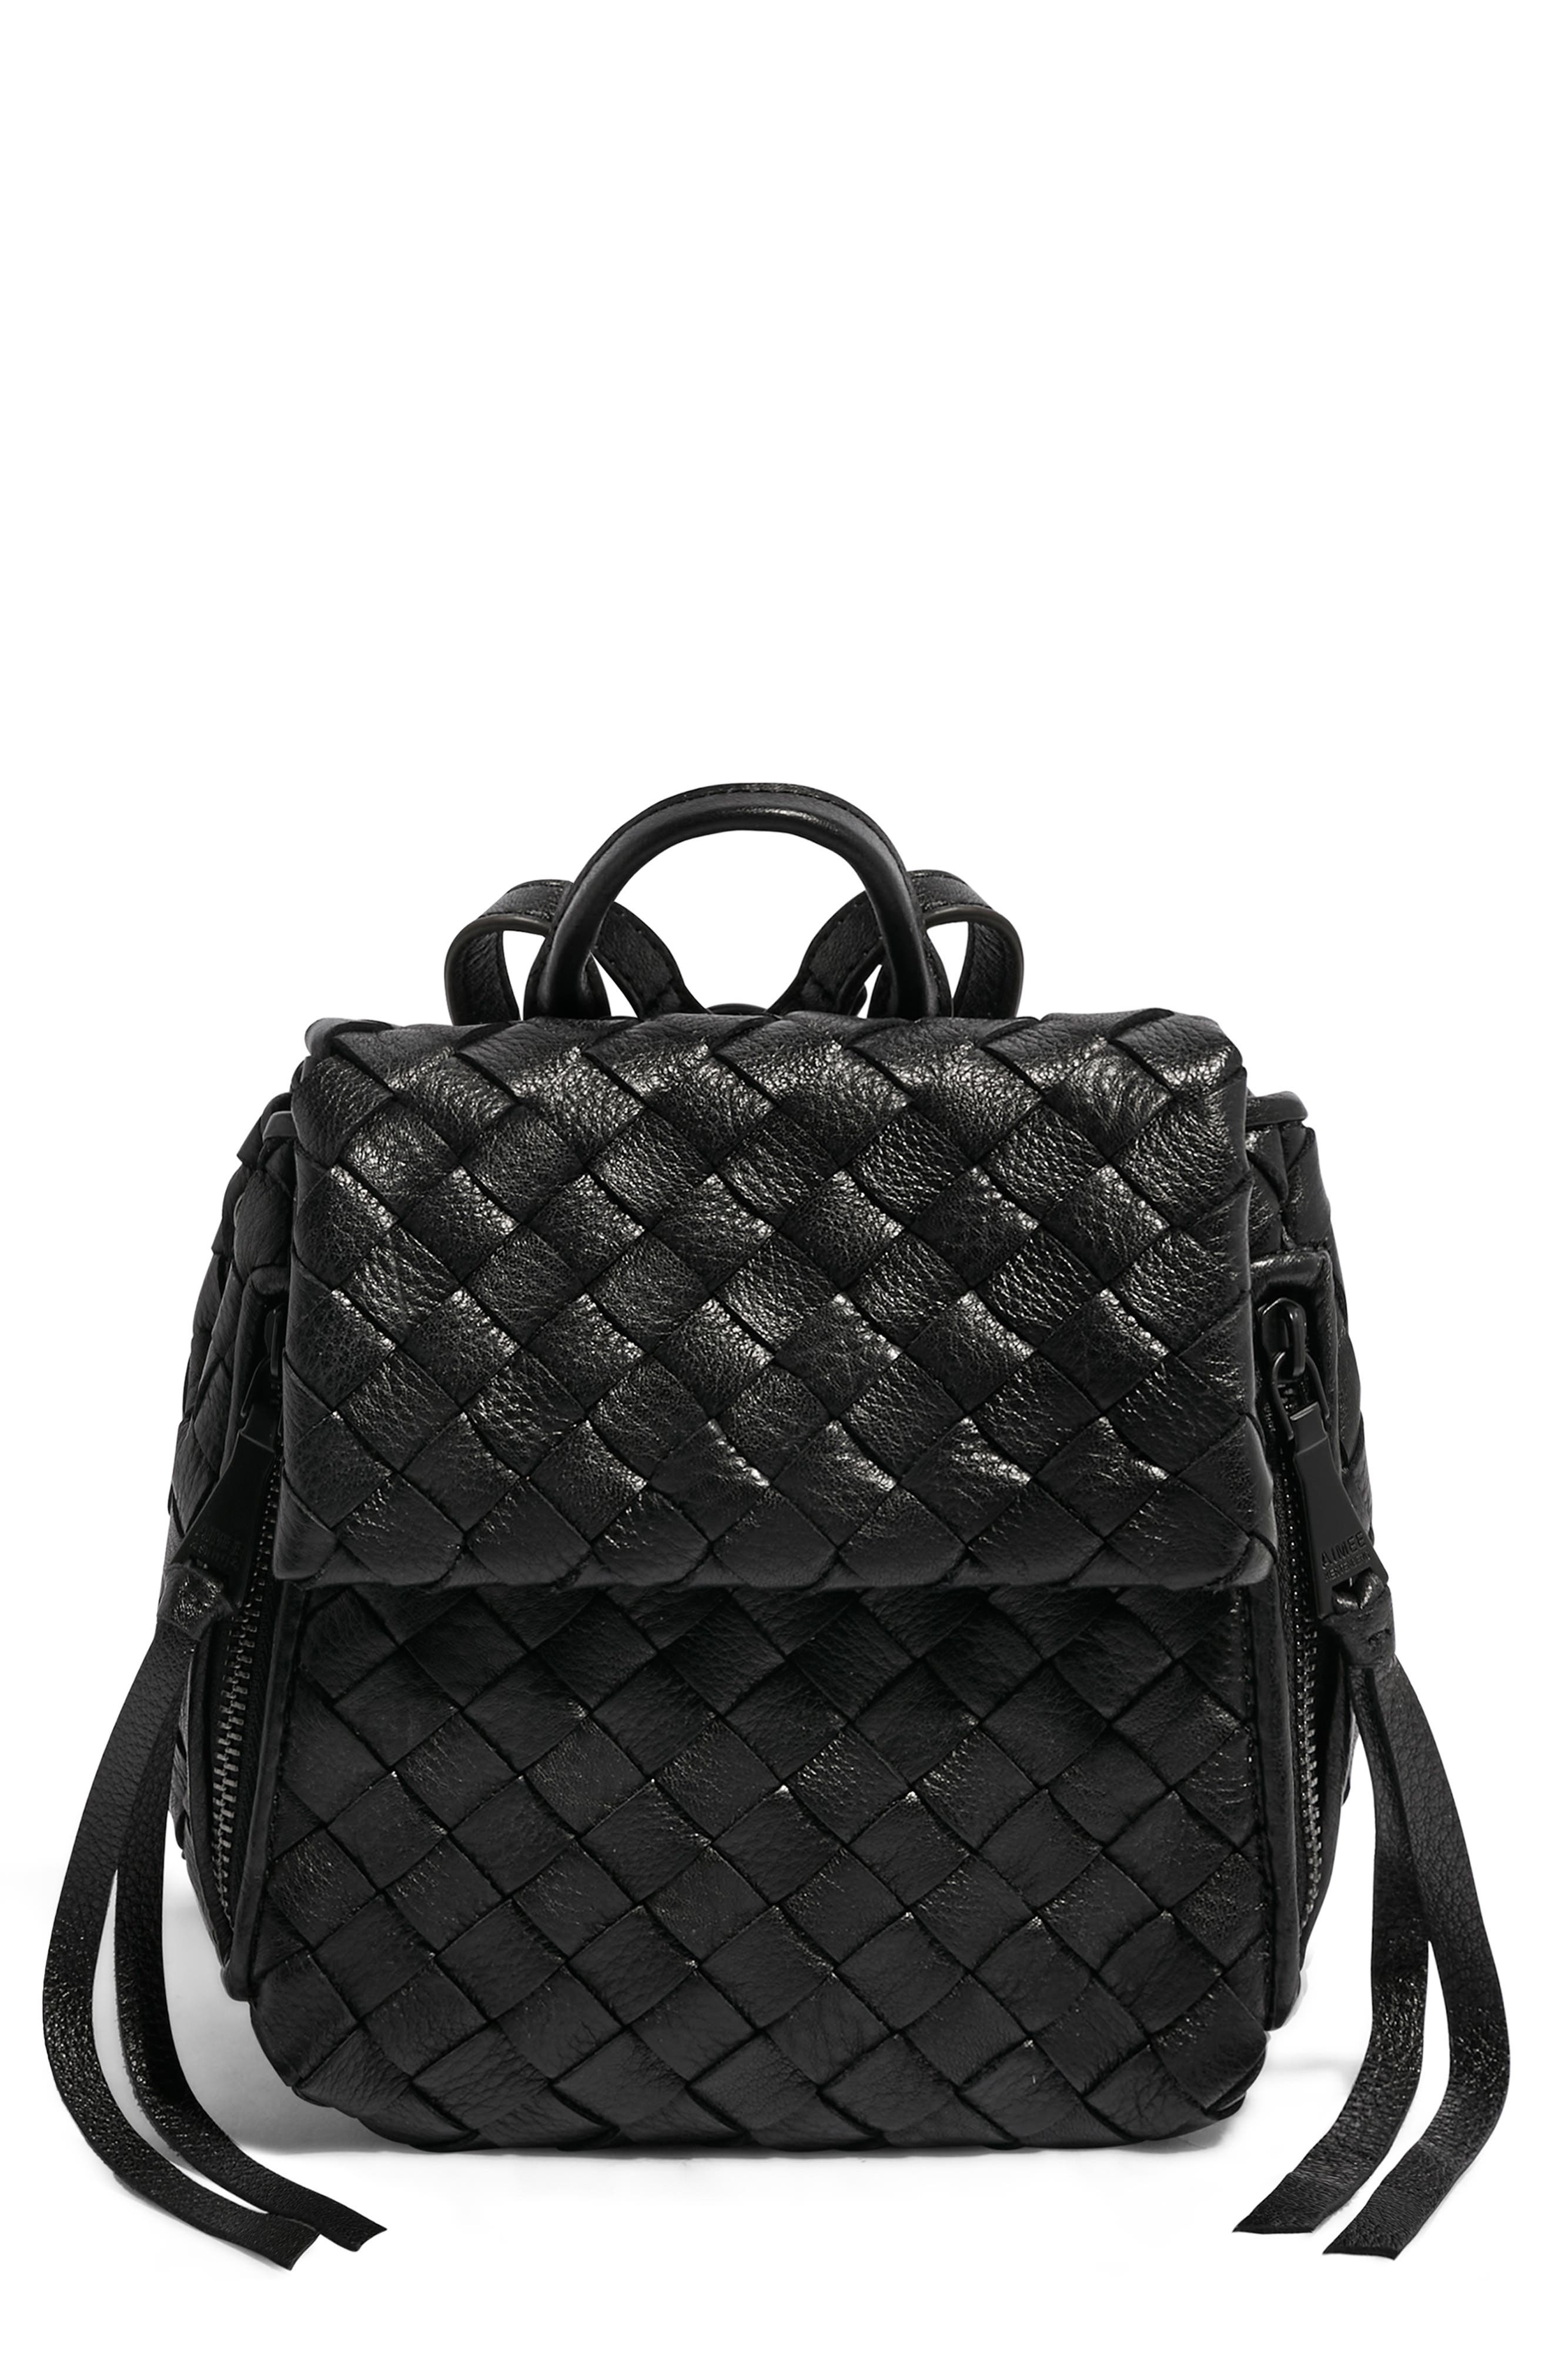 Designer Inspired Chevron Quilted Faux Leather Backpack Rucksack Women's Ladies 